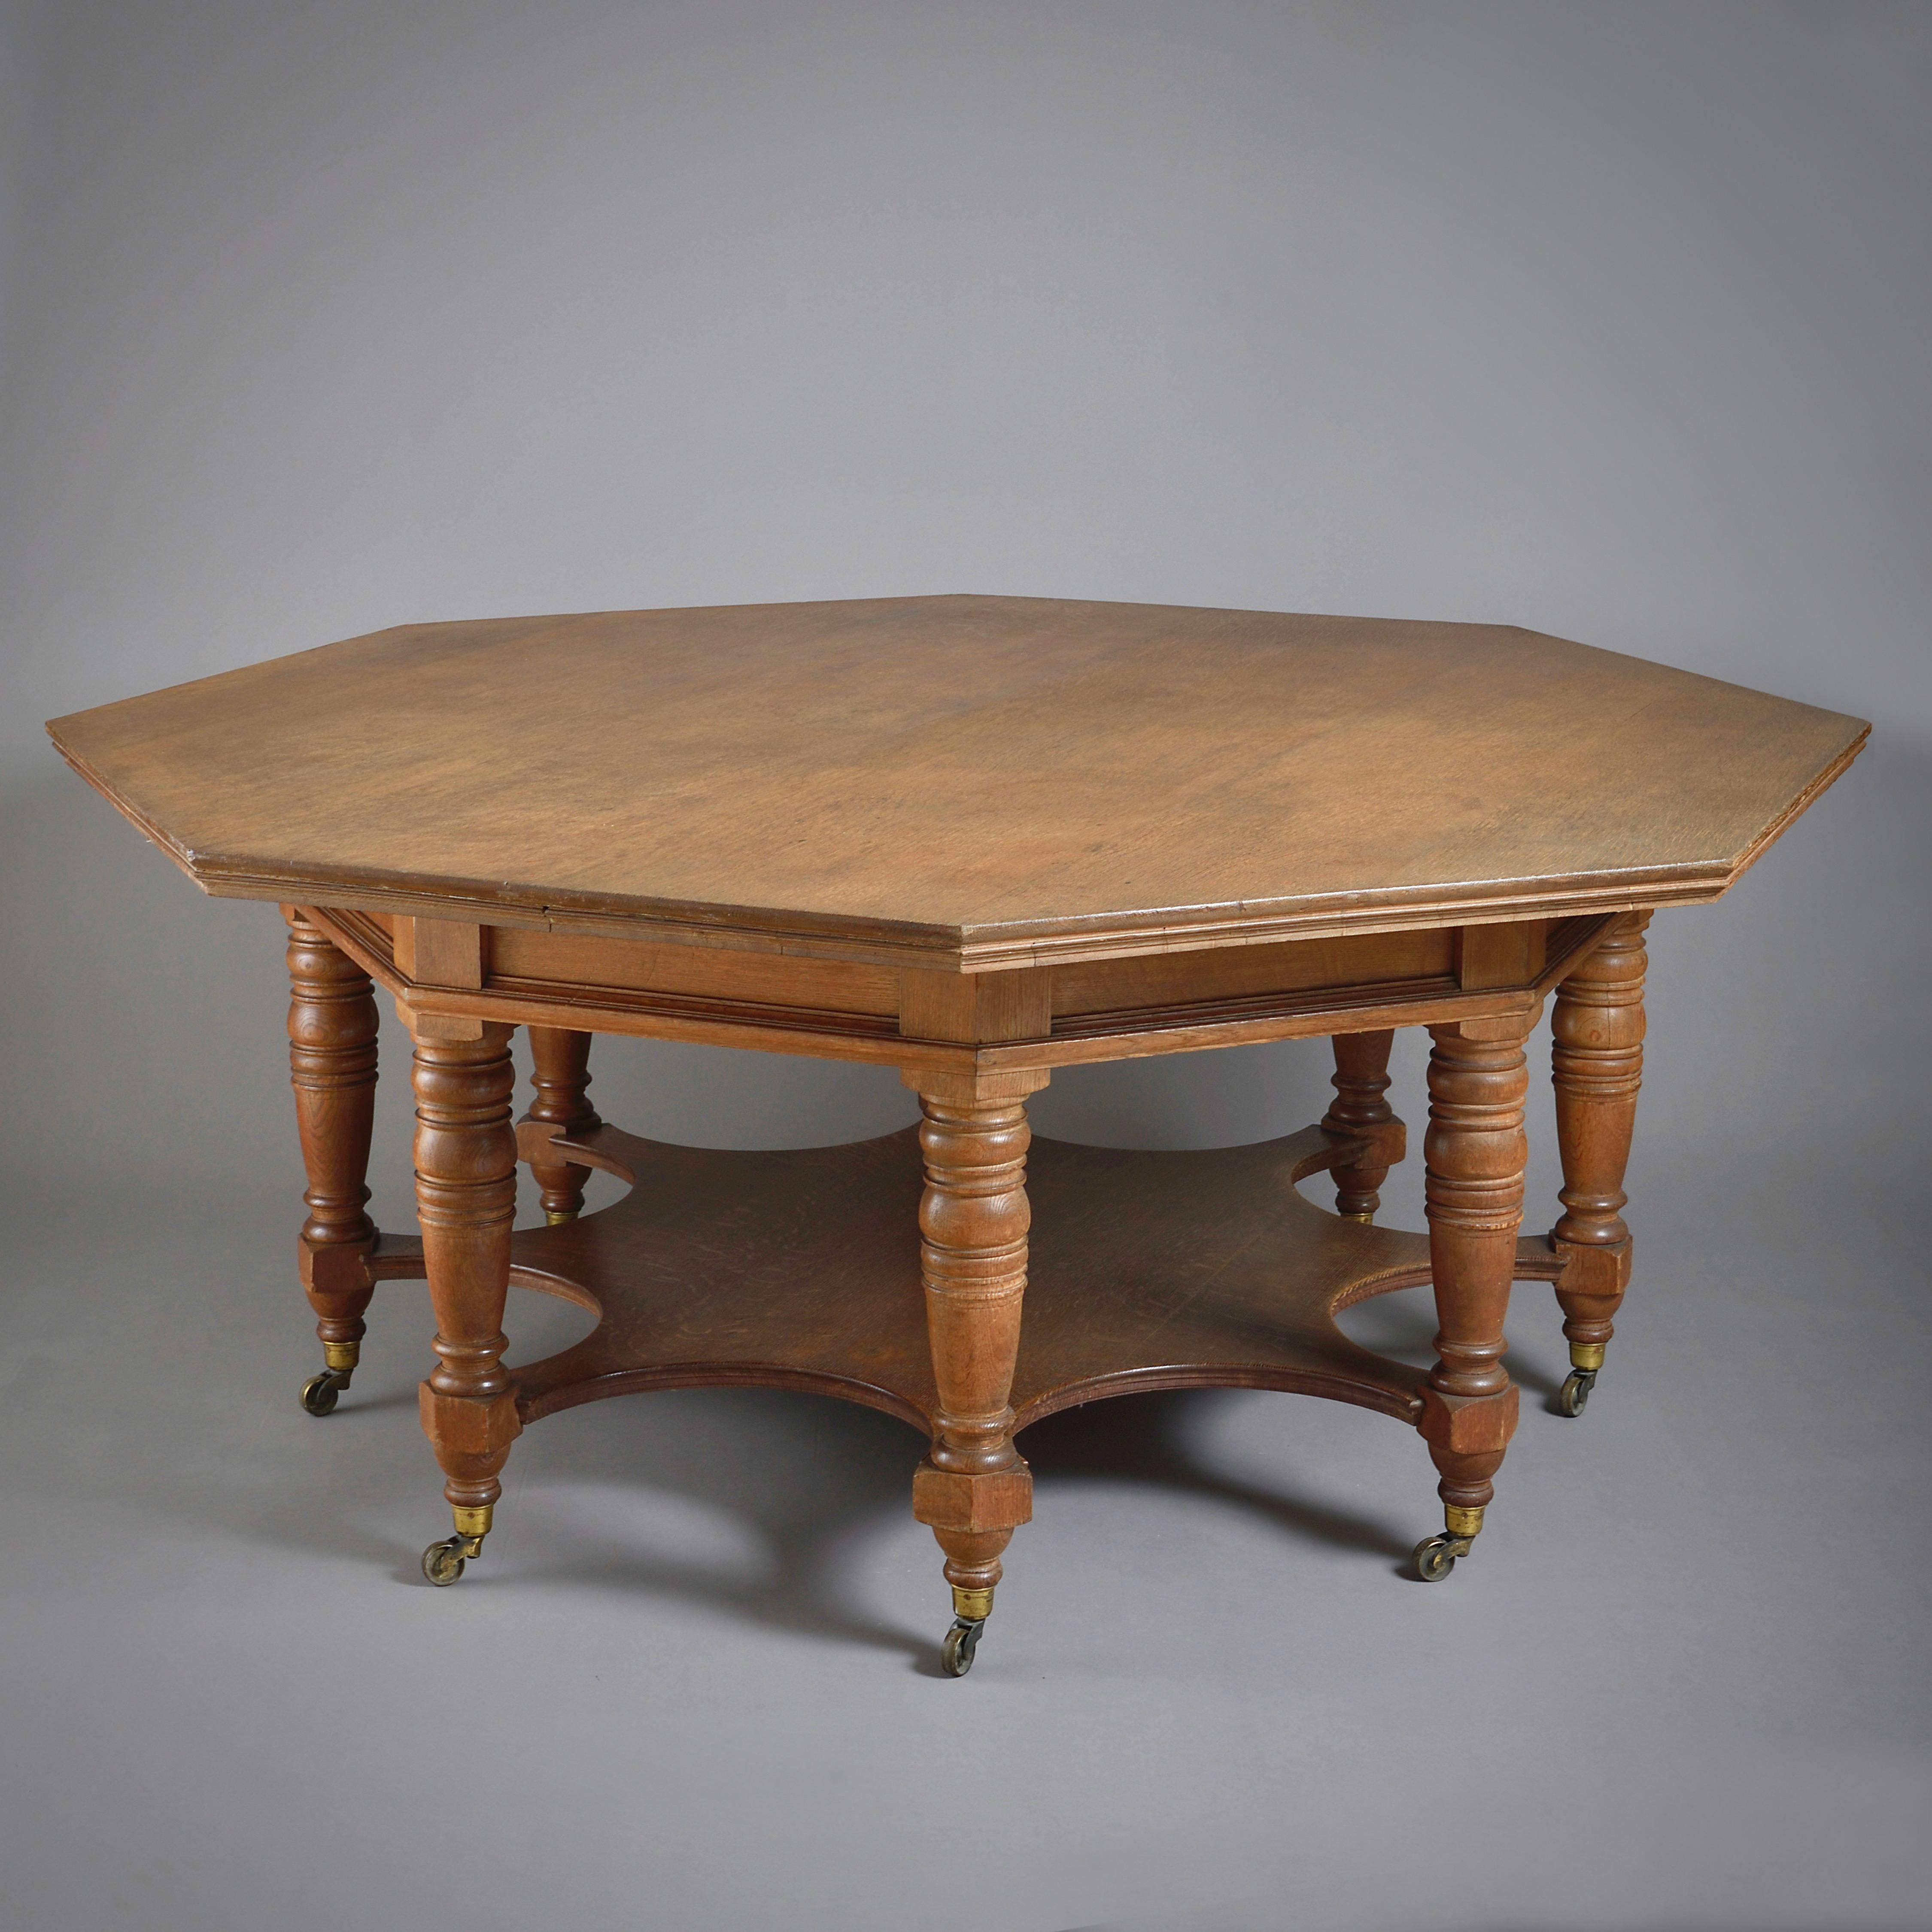 A massive octagonal oak centre table in the manner of Phillip Webb, circa 1875.

The socket castors stamped COPE & COLLINSON PATENT.